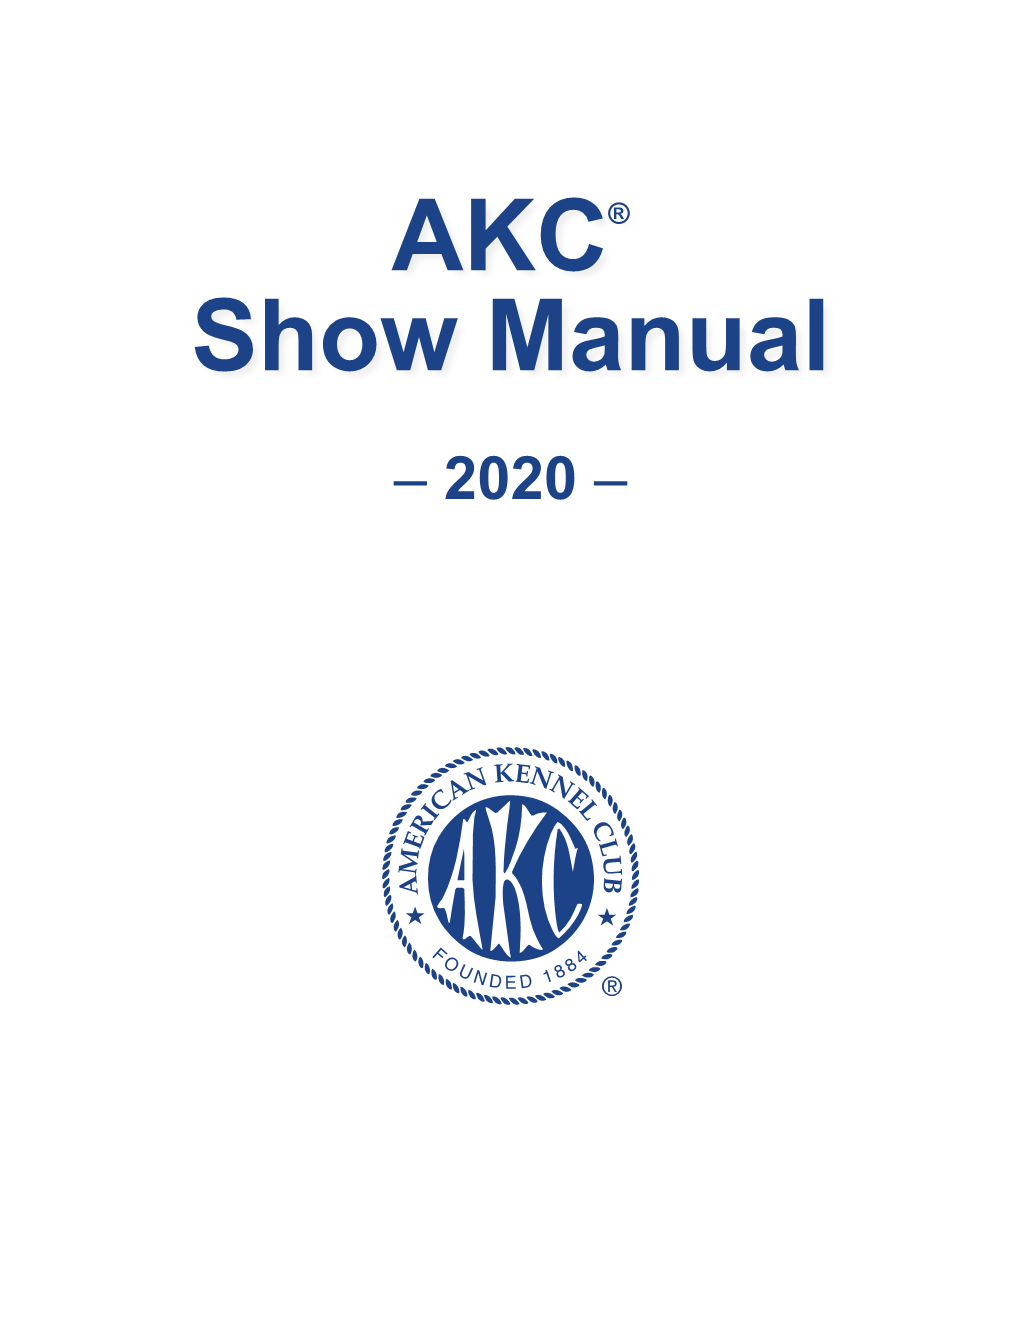 AKC Show Manual 2020 Edition Day of the Event Arrive at Least 2 Hours Before the Start of Judging